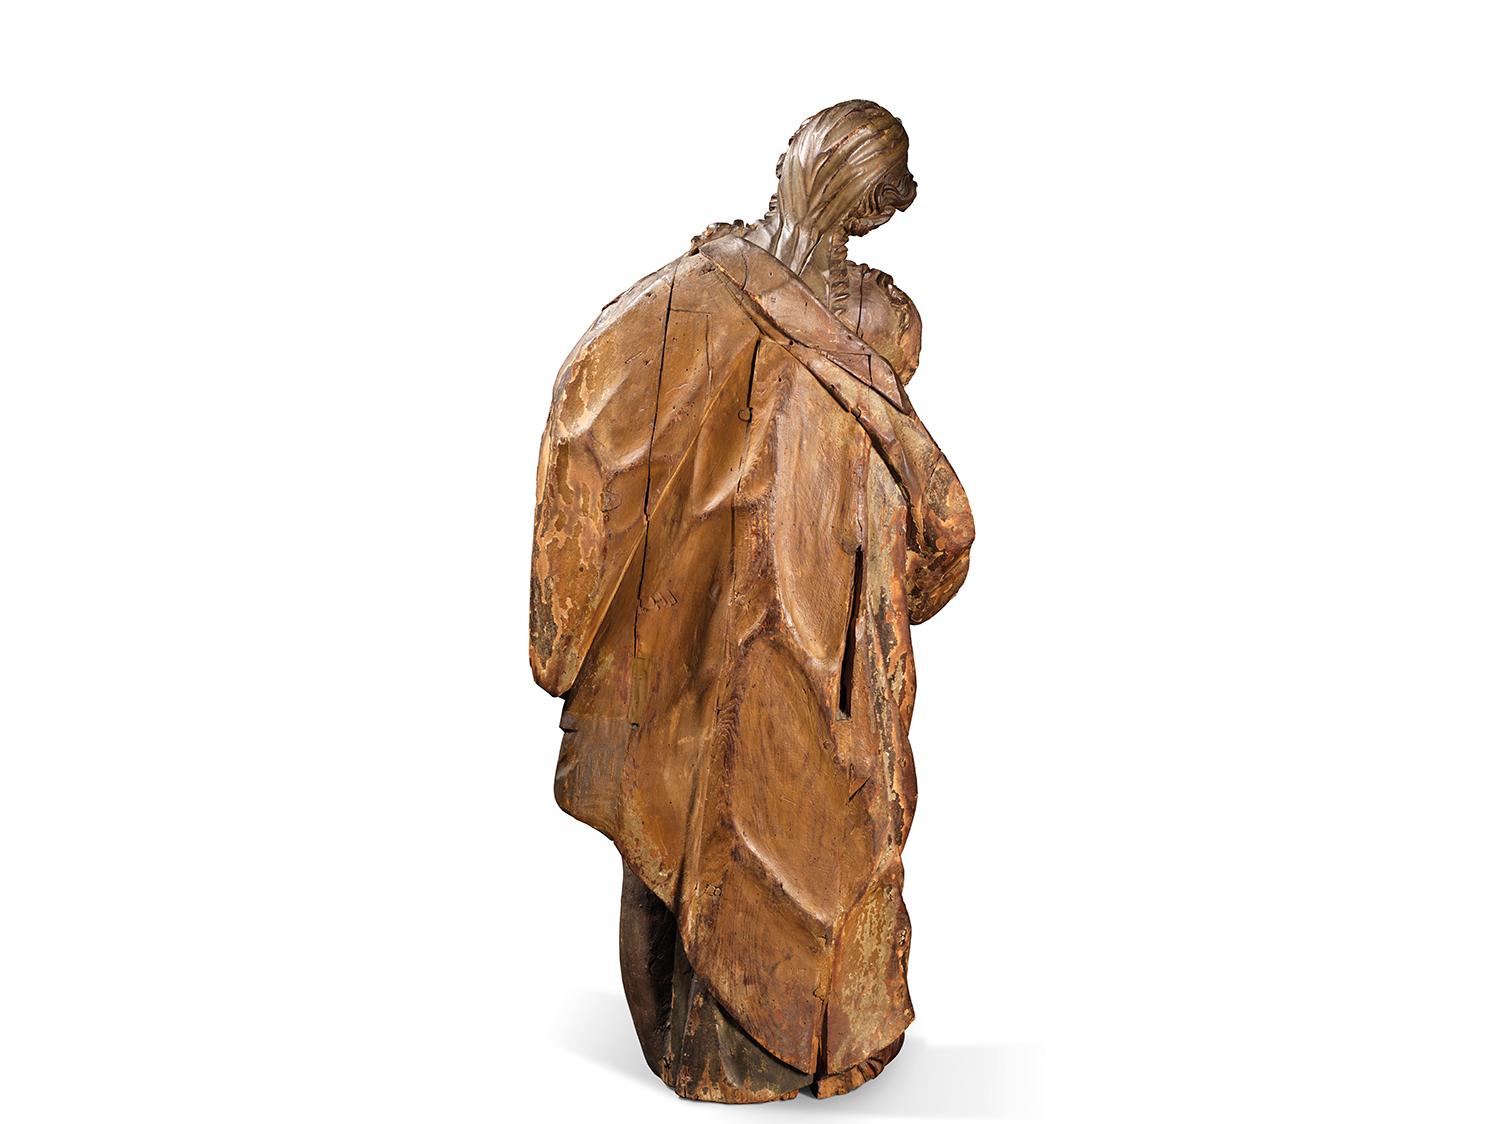 SAINT AFRE OF AUGSBURG

ORIGIN : SOUTHERN GERMANY
PERIOD : 16th CENTURY

Height : 119 cm
Width : 50 cm
Depth : 28 cm 

Limewood
Good state of conservation


Patron Saint of the city and the diocese of Augsburg, the oldest traces of her